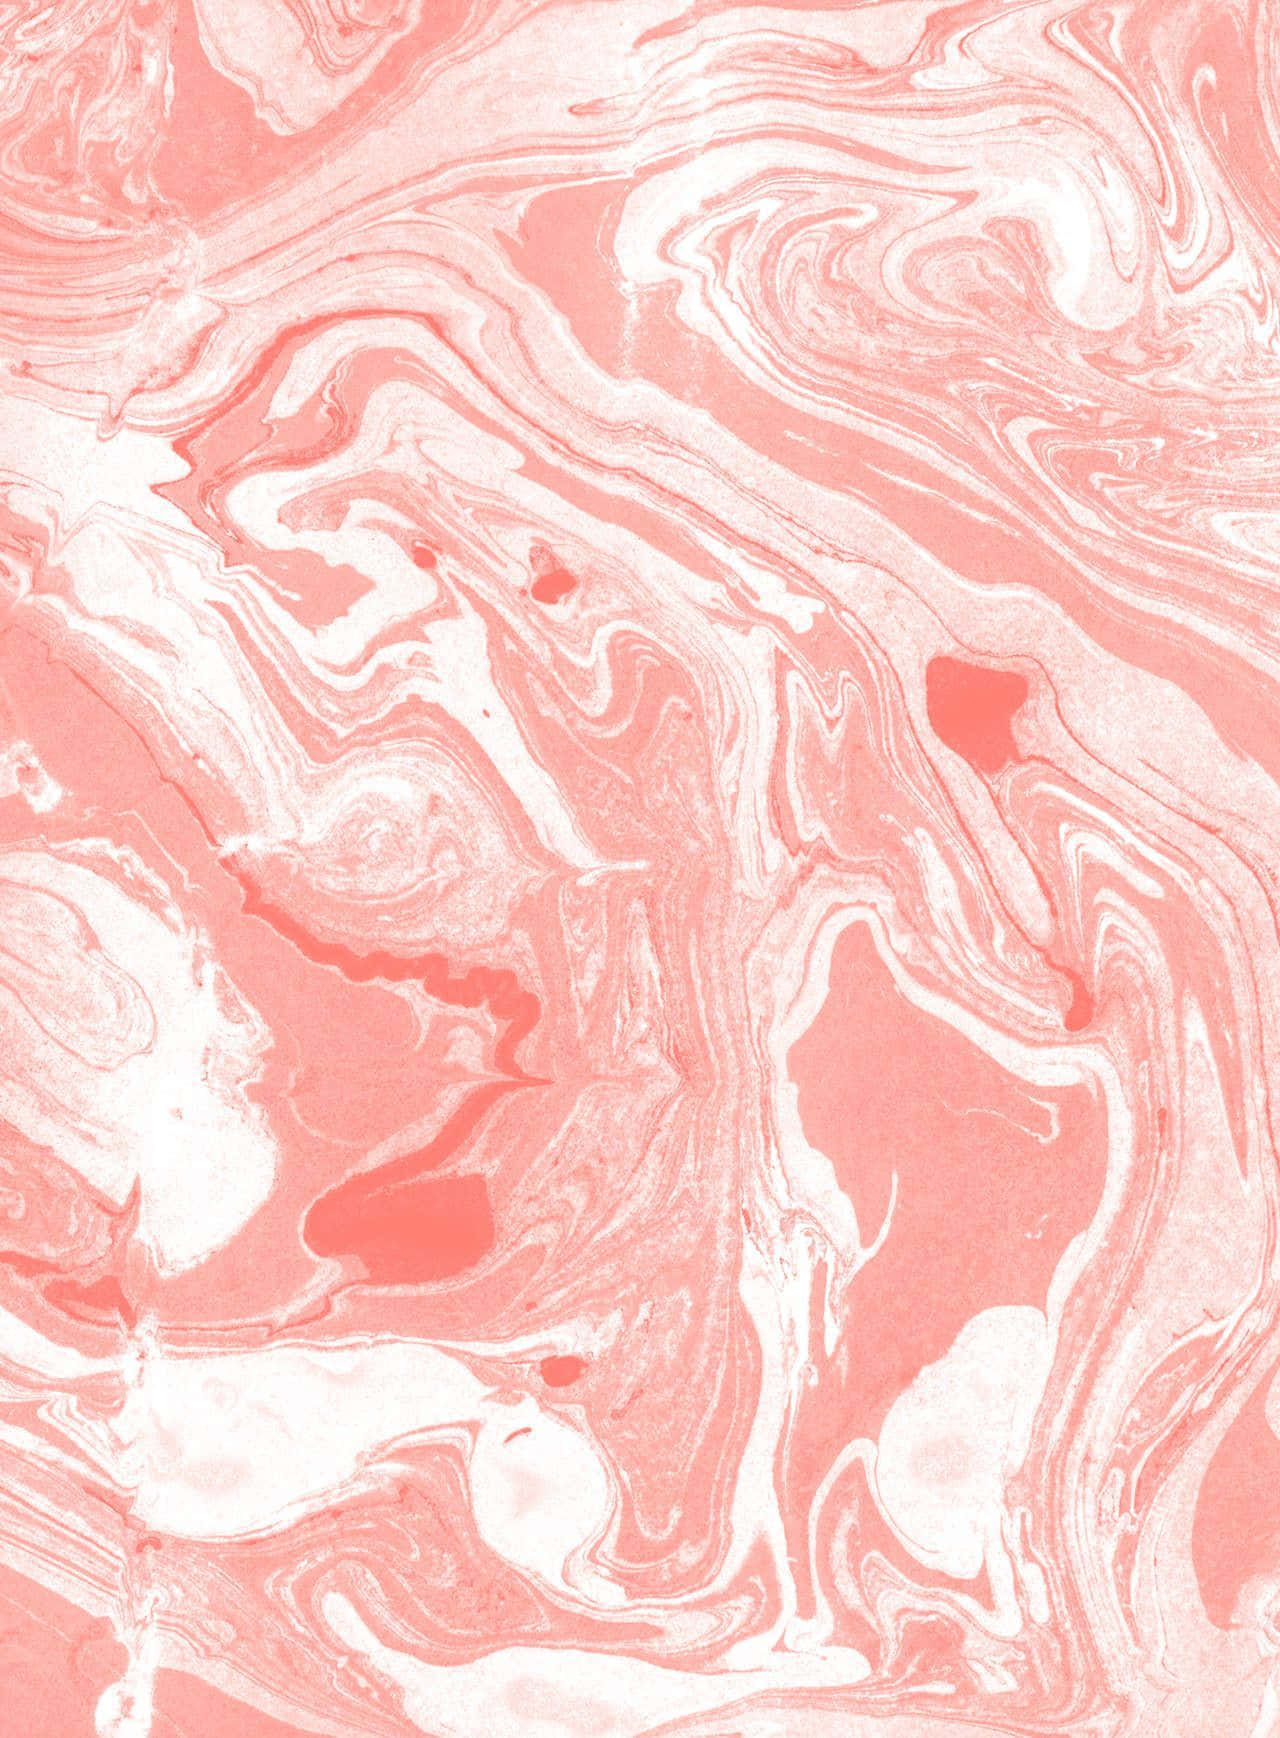 "A vibrant red modern marble background perfect for any surface design."